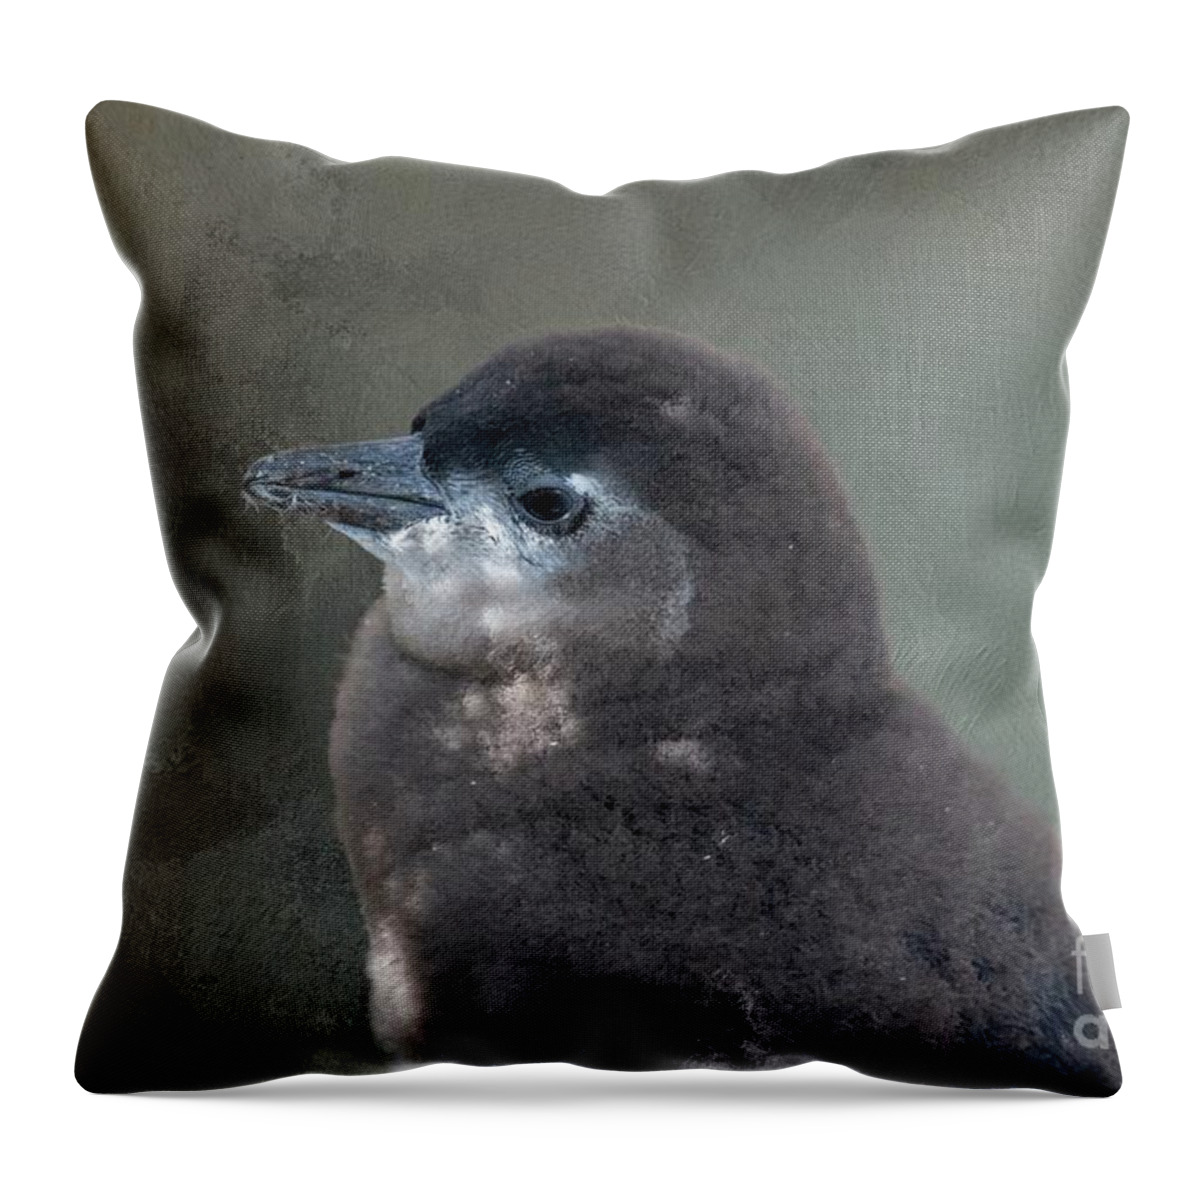 African Penguin Throw Pillow featuring the photograph African Penguin Chick Portrait by Eva Lechner